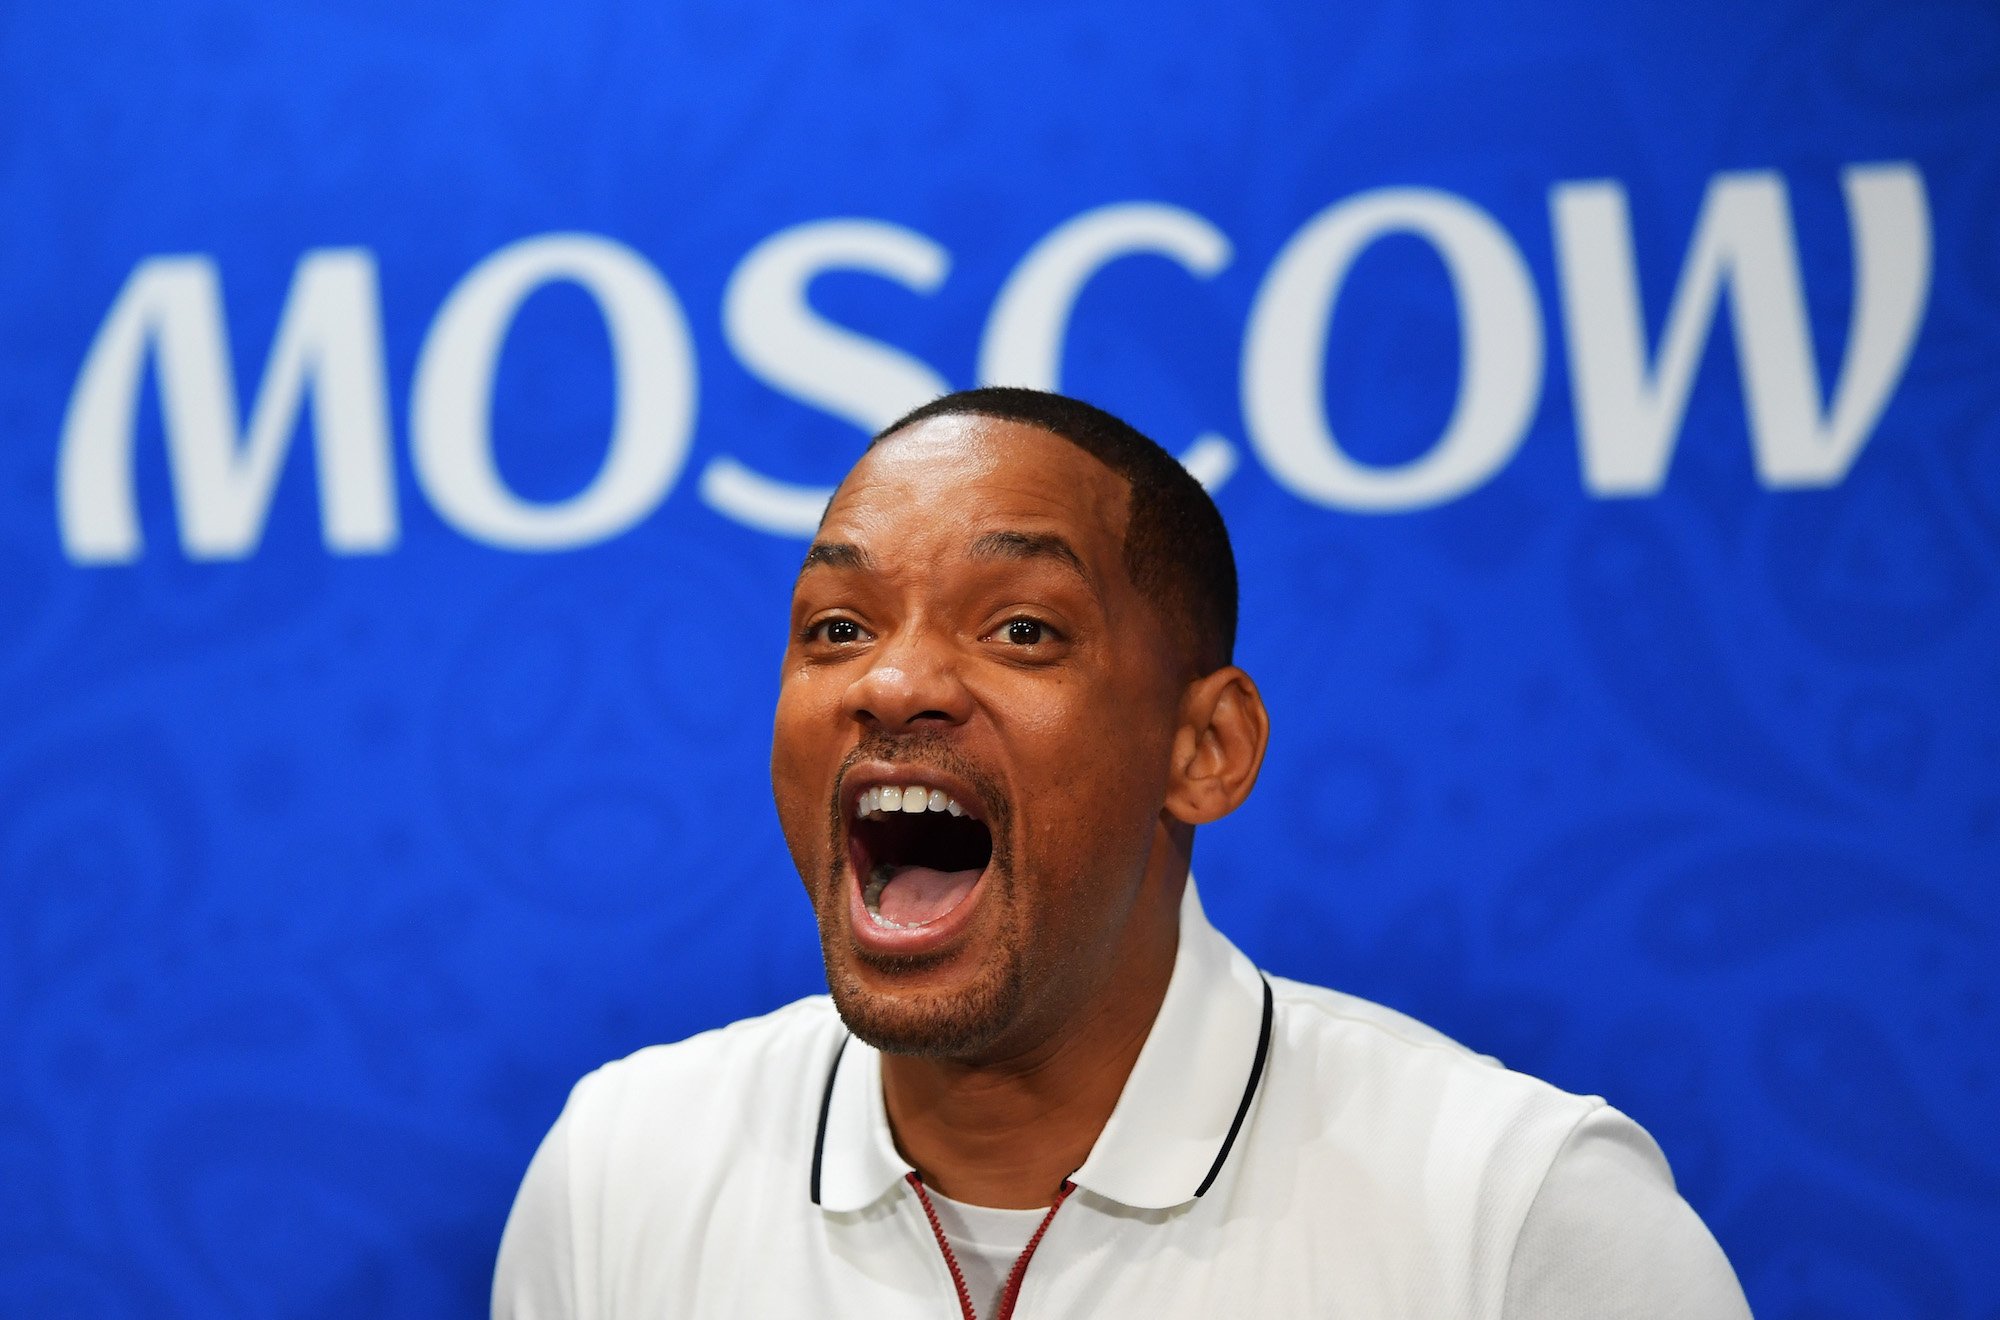 Will Smith with his jaw dropped, looking surprised, in front of a blue background